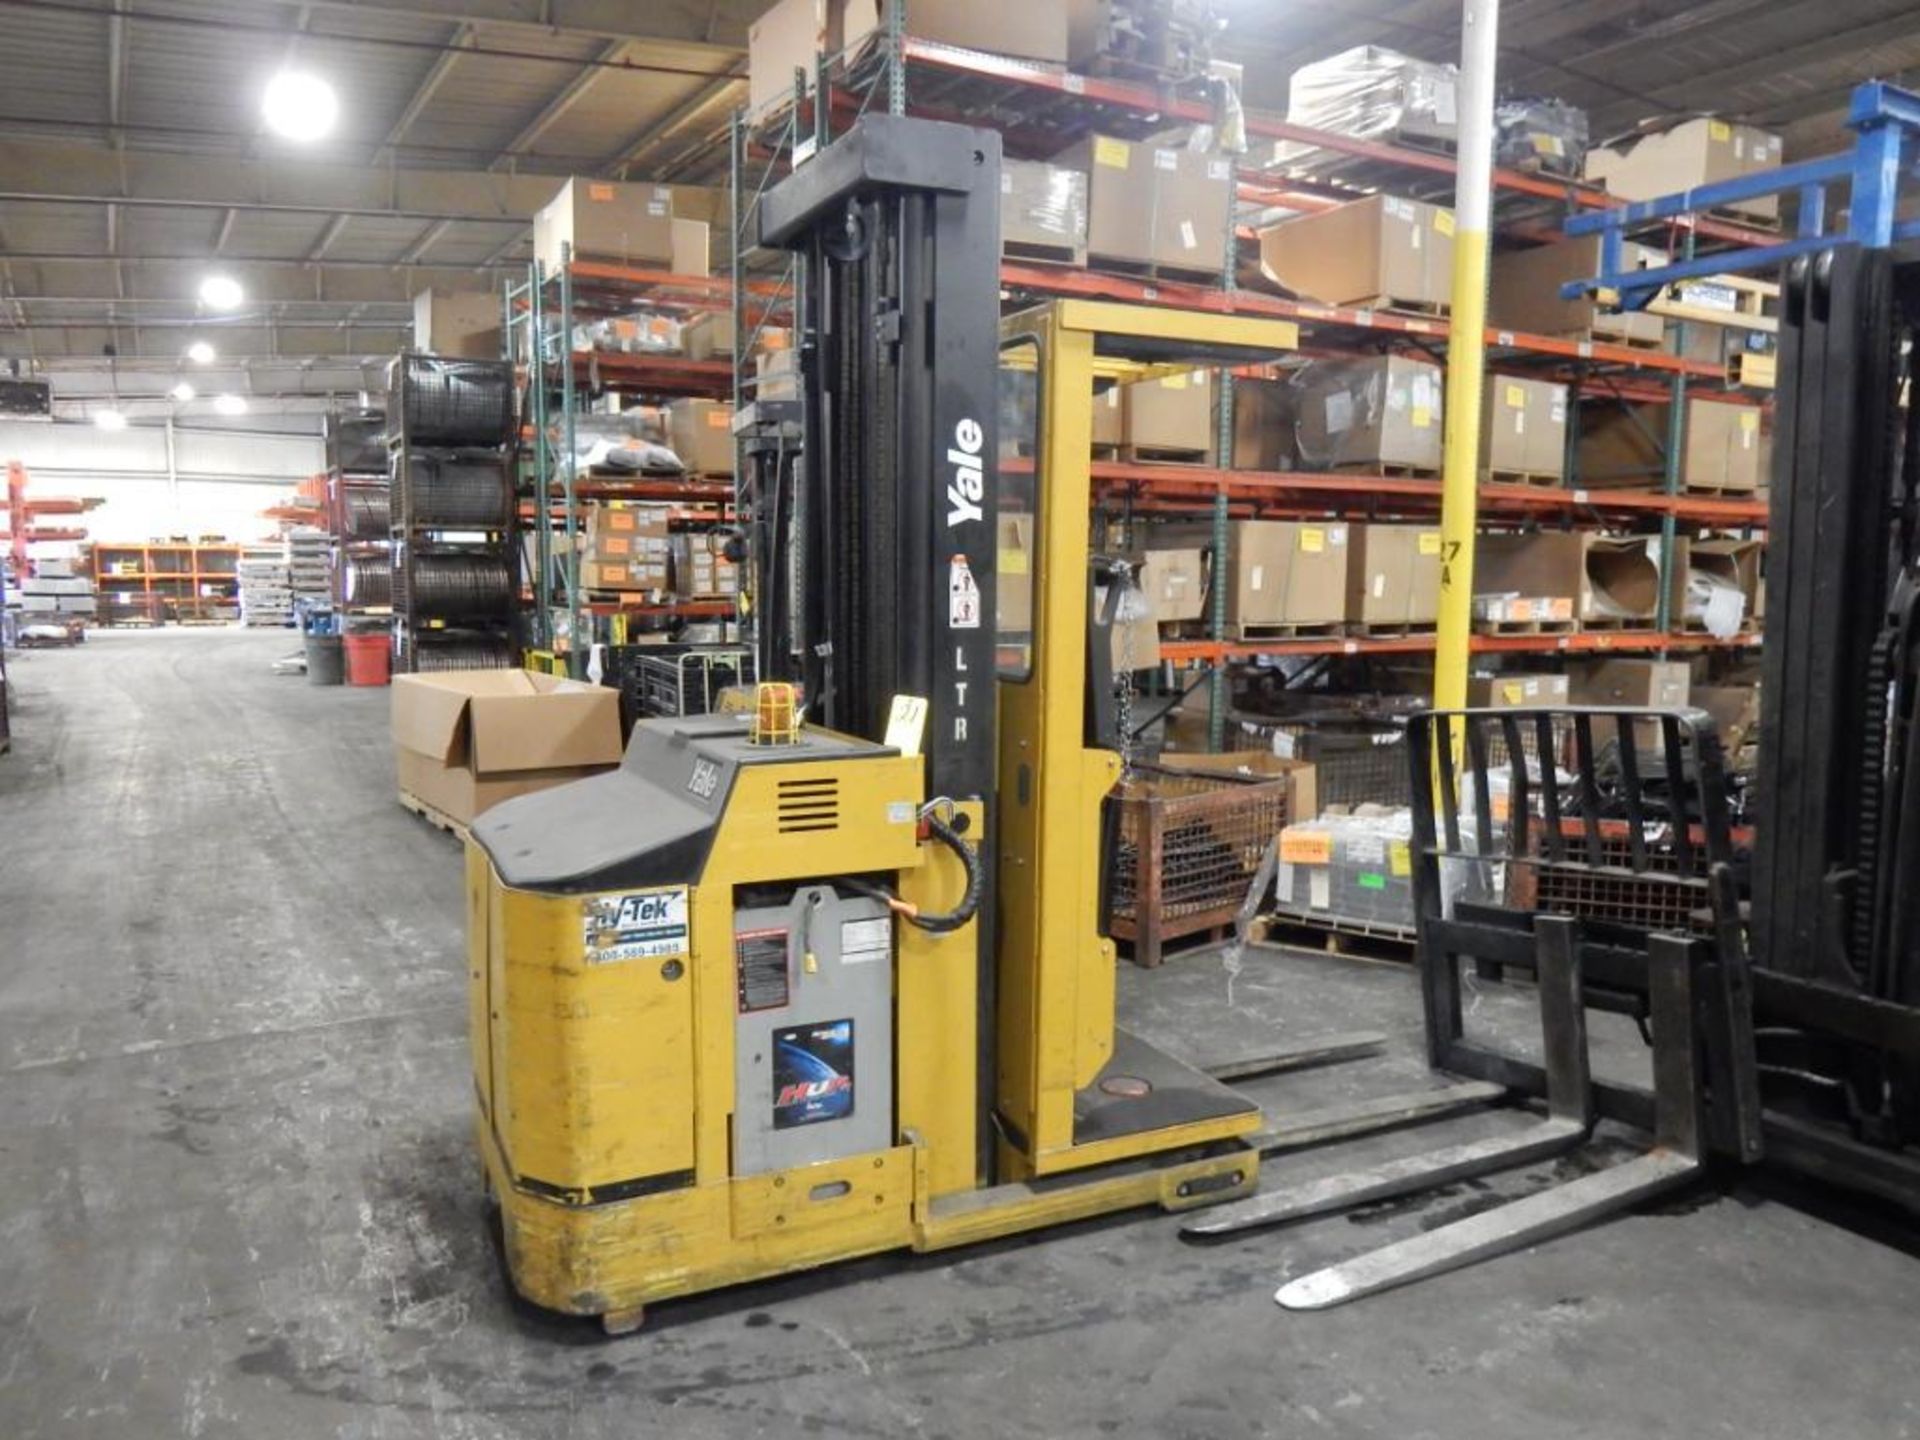 YALE ELEC. STAND-UP RIDER FORKLIFT, M# OS030BEN24TE105, S/N D826N03792J, 3,000 LB. CAP., 1,832 HOURS